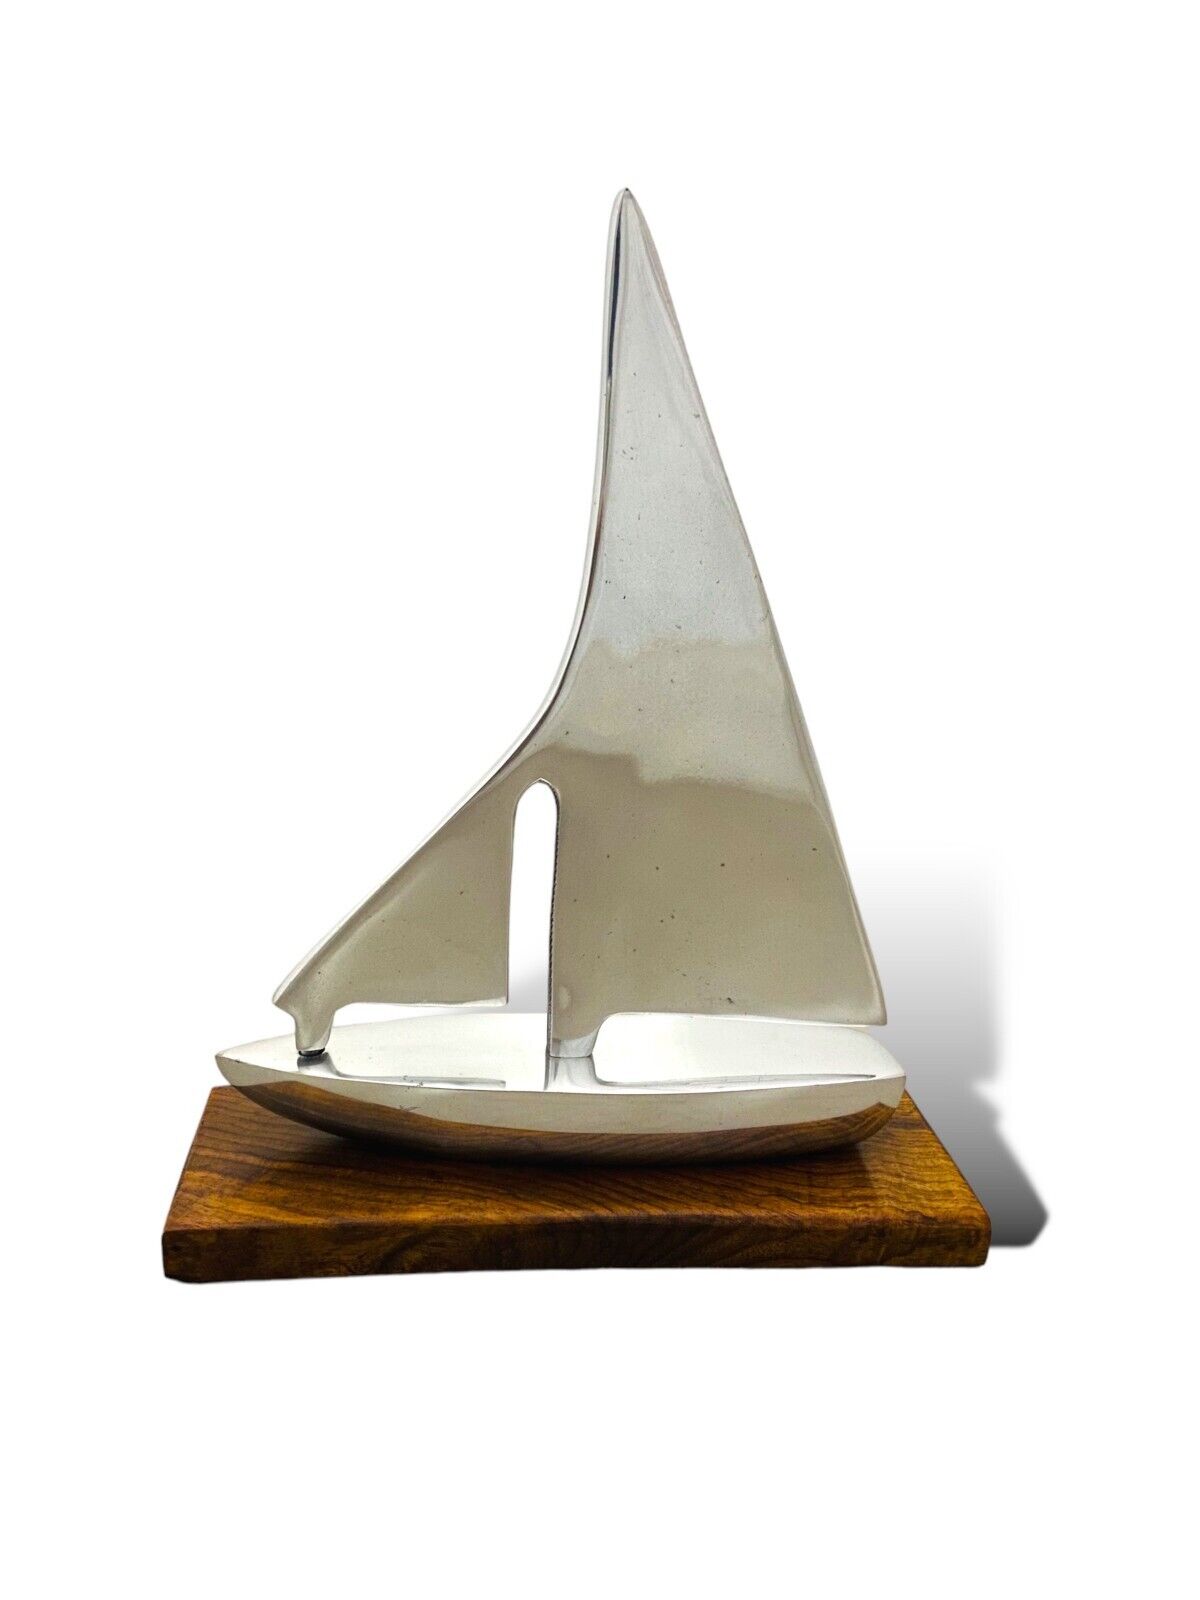 Sailing Ship made of Aluminium  with Wooden Base  7.87 in * 1.97 in * 10.24 in